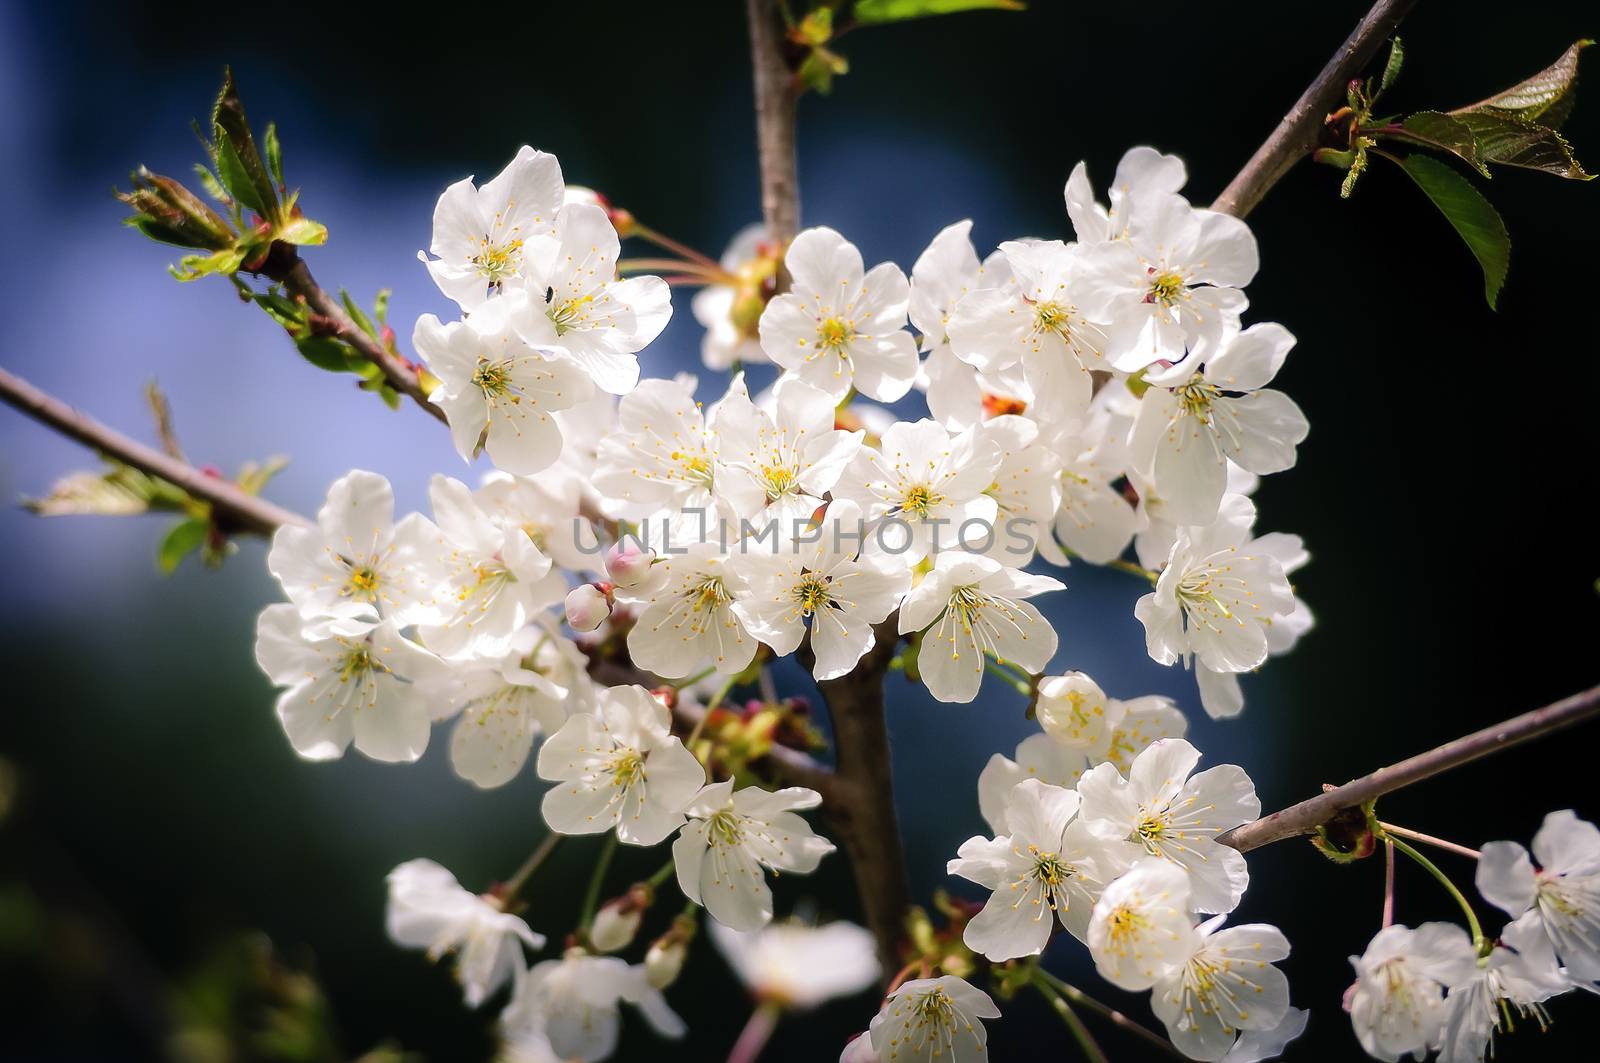 White cherry blossom on twig, dark blue and green background by asafaric